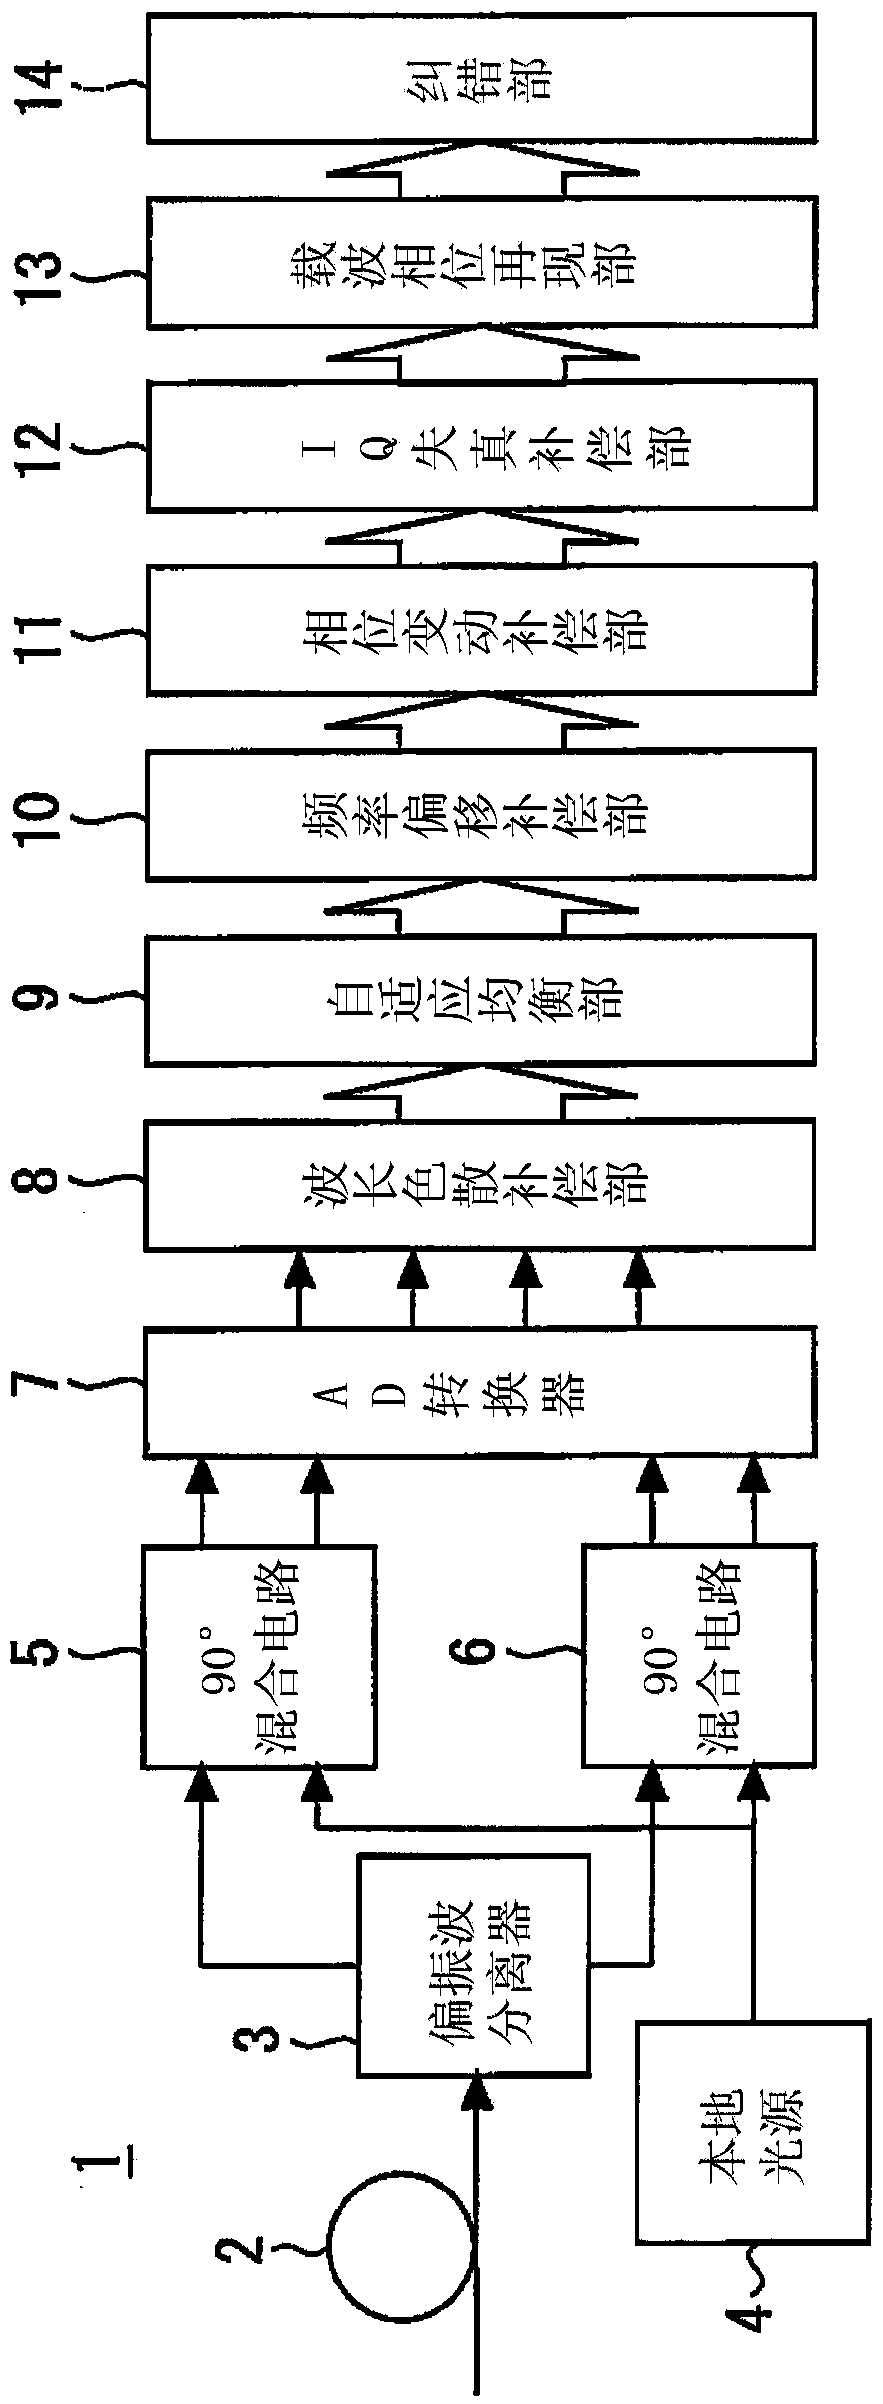 Optical transmission distortion compensation device, optical transmission distortion compensation method, and communication device